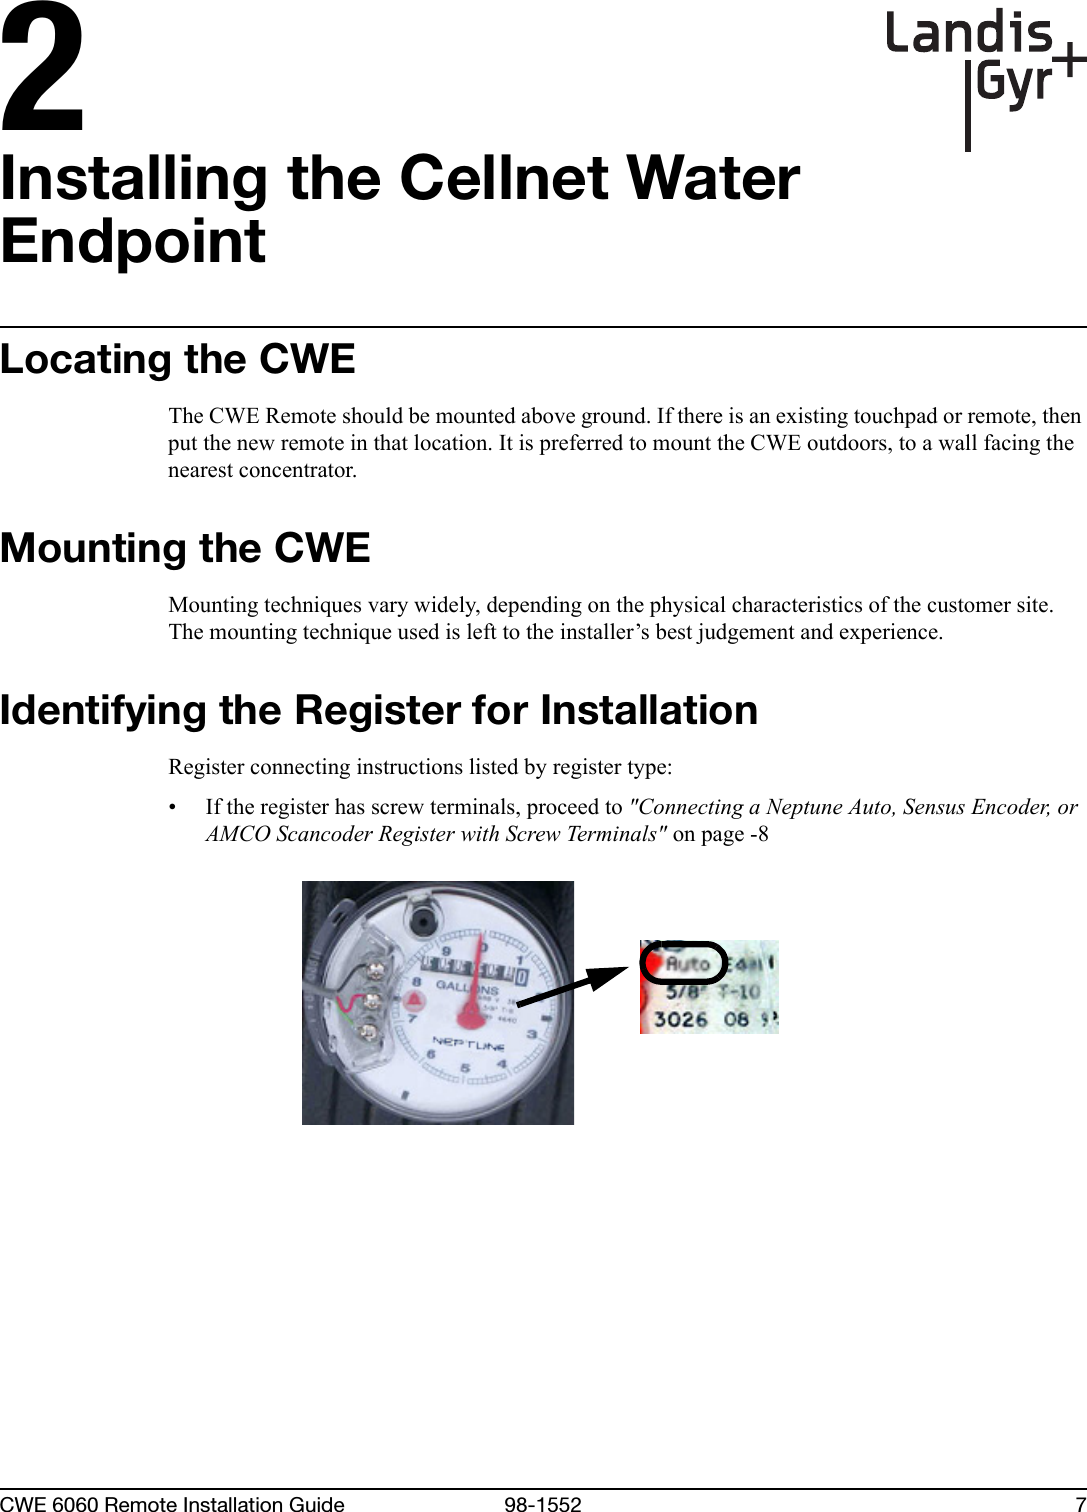 2CWE 6060 Remote Installation Guide 98-1552 7Installing the Cellnet Water EndpointLocating the CWEThe CWE Remote should be mounted above ground. If there is an existing touchpad or remote, then put the new remote in that location. It is preferred to mount the CWE outdoors, to a wall facing the nearest concentrator. Mounting the CWEMounting techniques vary widely, depending on the physical characteristics of the customer site. The mounting technique used is left to the installer’s best judgement and experience.Identifying the Register for InstallationRegister connecting instructions listed by register type:• If the register has screw terminals, proceed to &quot;Connecting a Neptune Auto, Sensus Encoder, or AMCO Scancoder Register with Screw Terminals&quot; on page -8